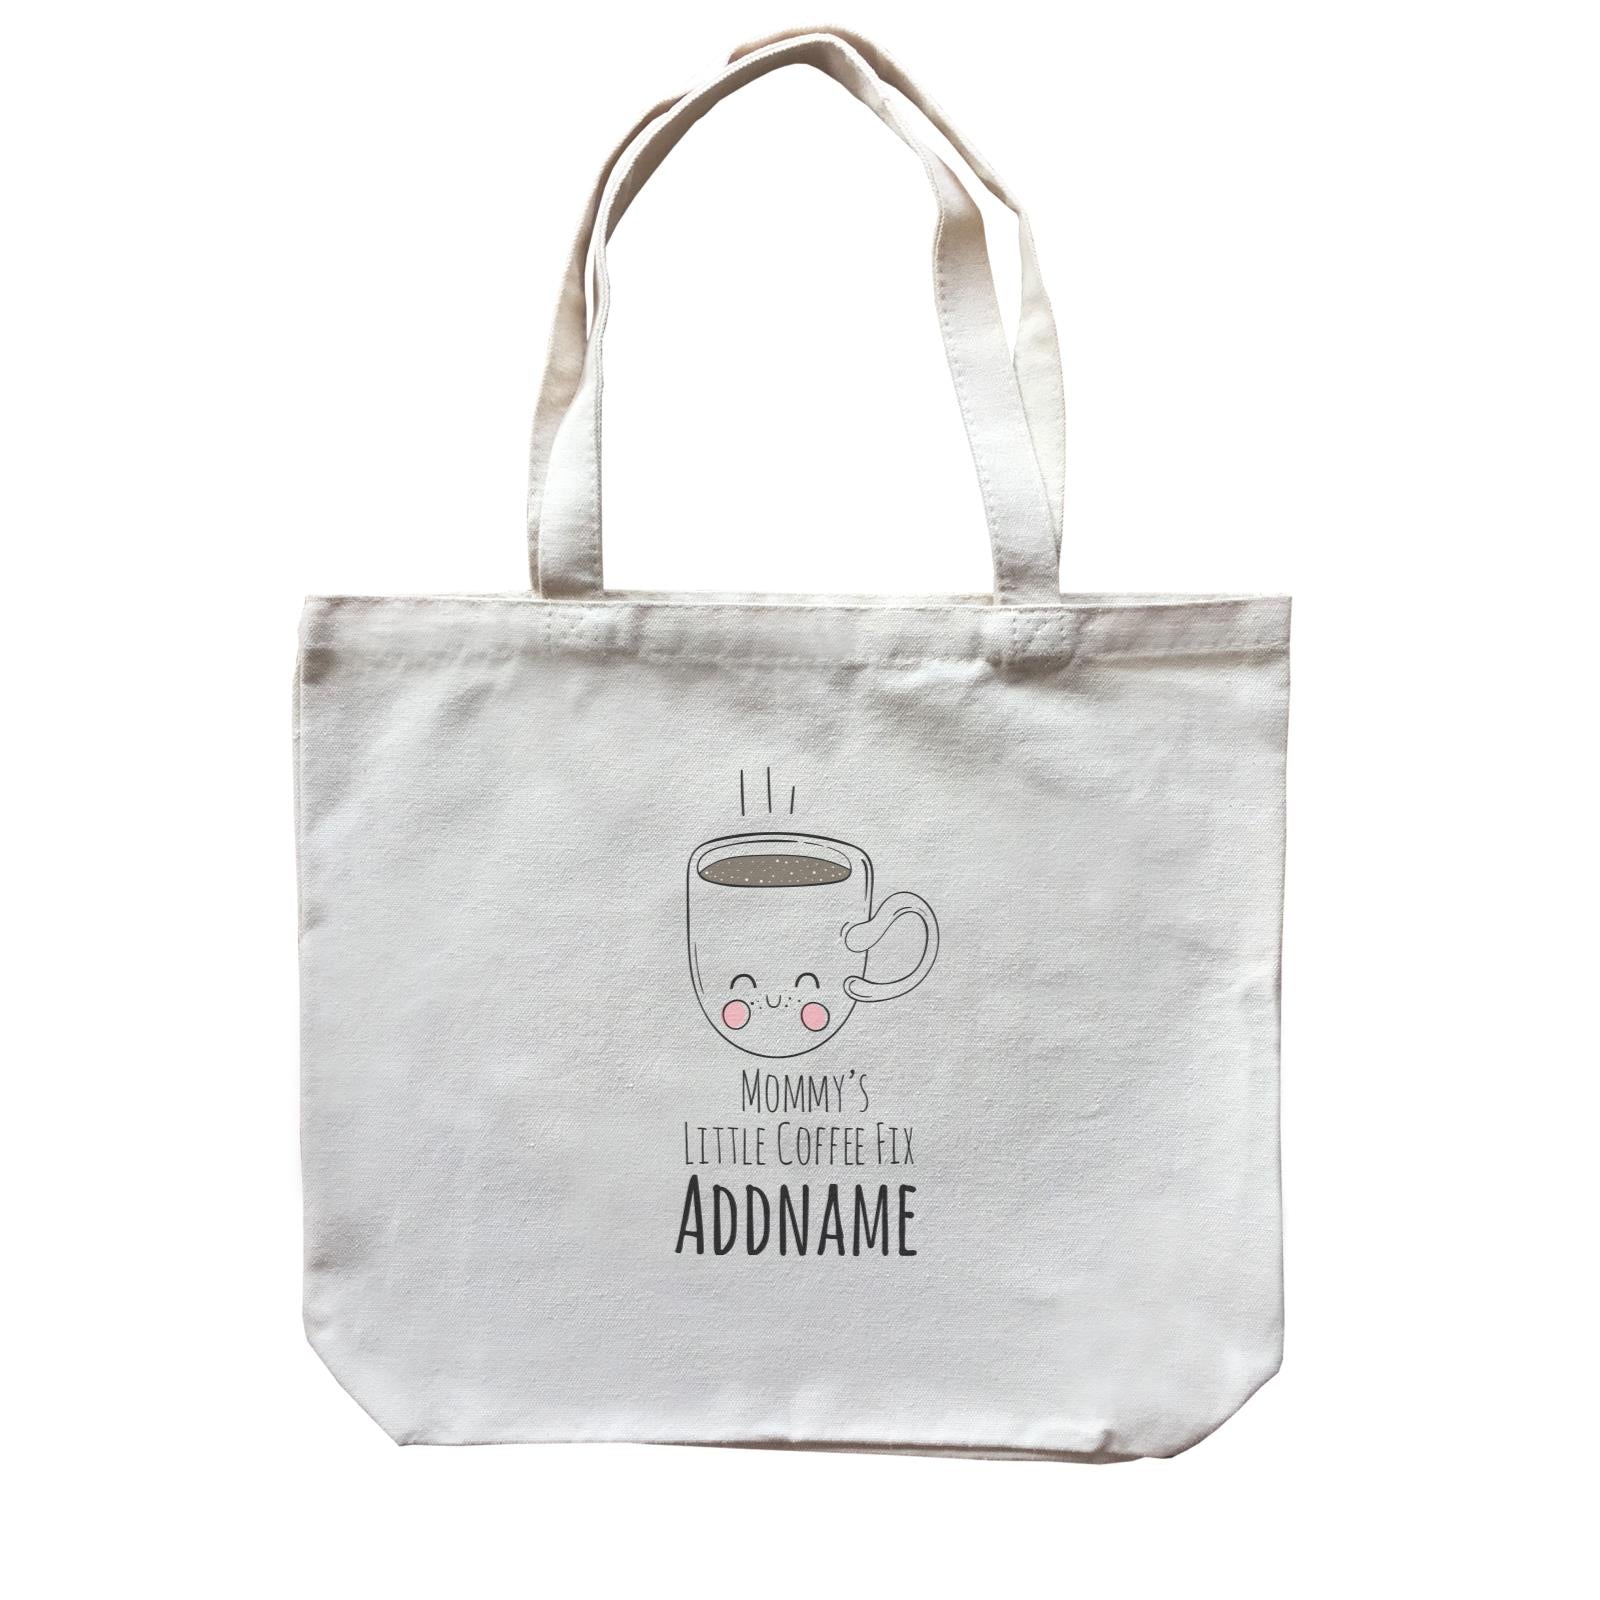 Drawn Sweet Snacks Mommy's Little Coffee Addname Canvas Bag